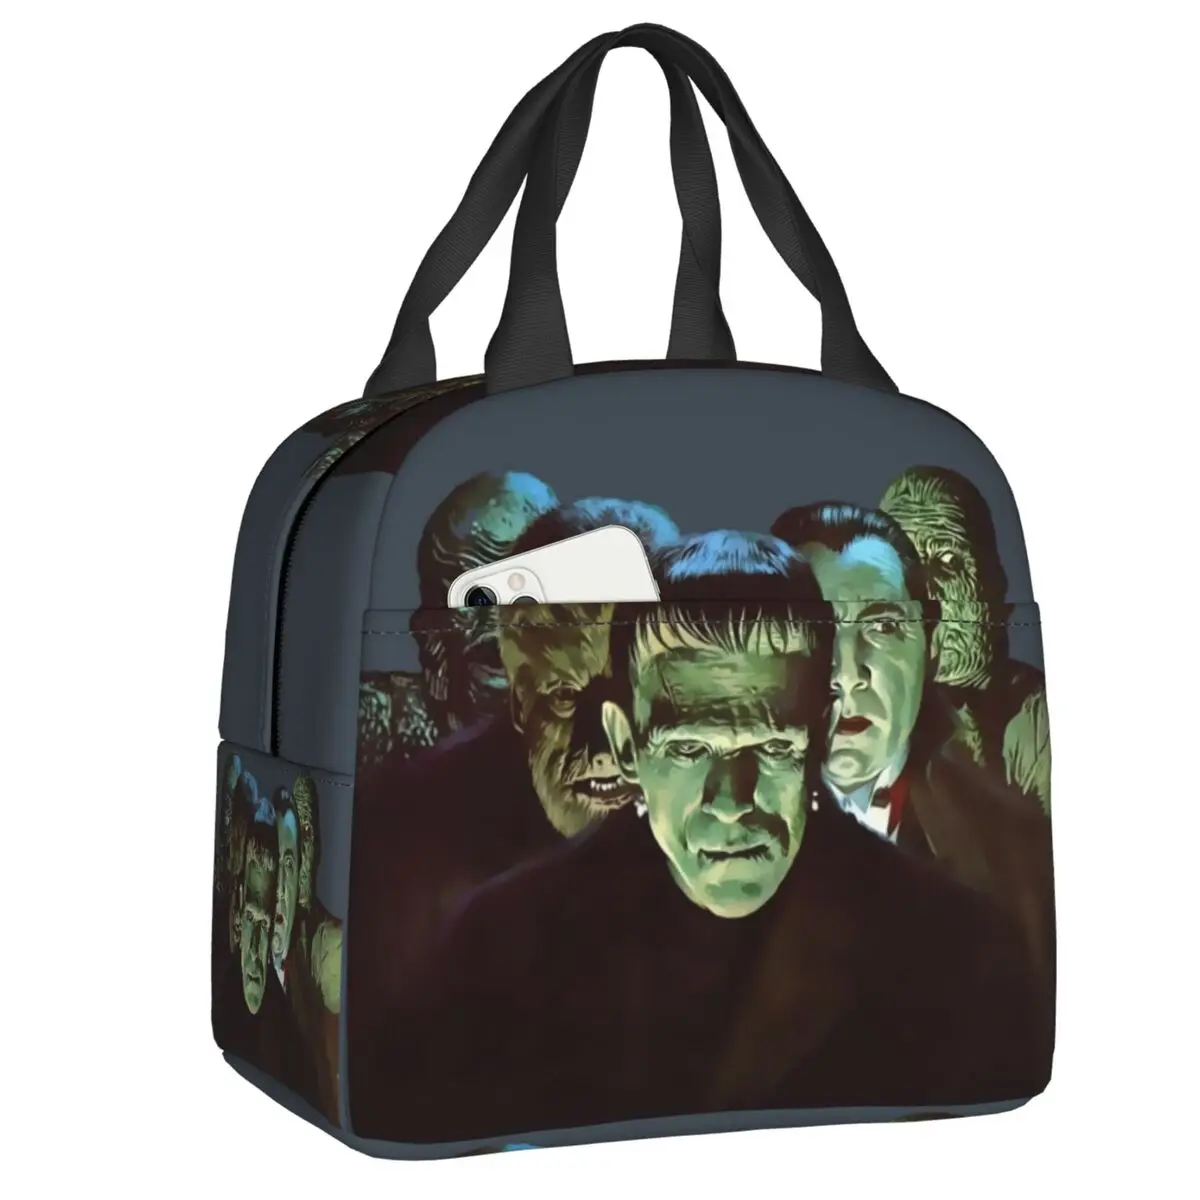 

Gang Of Monsters Insulated Lunch Bag for Women Frankenstein Halloween Horror Movie Cooler Thermal Lunch Tote Box Food Bags